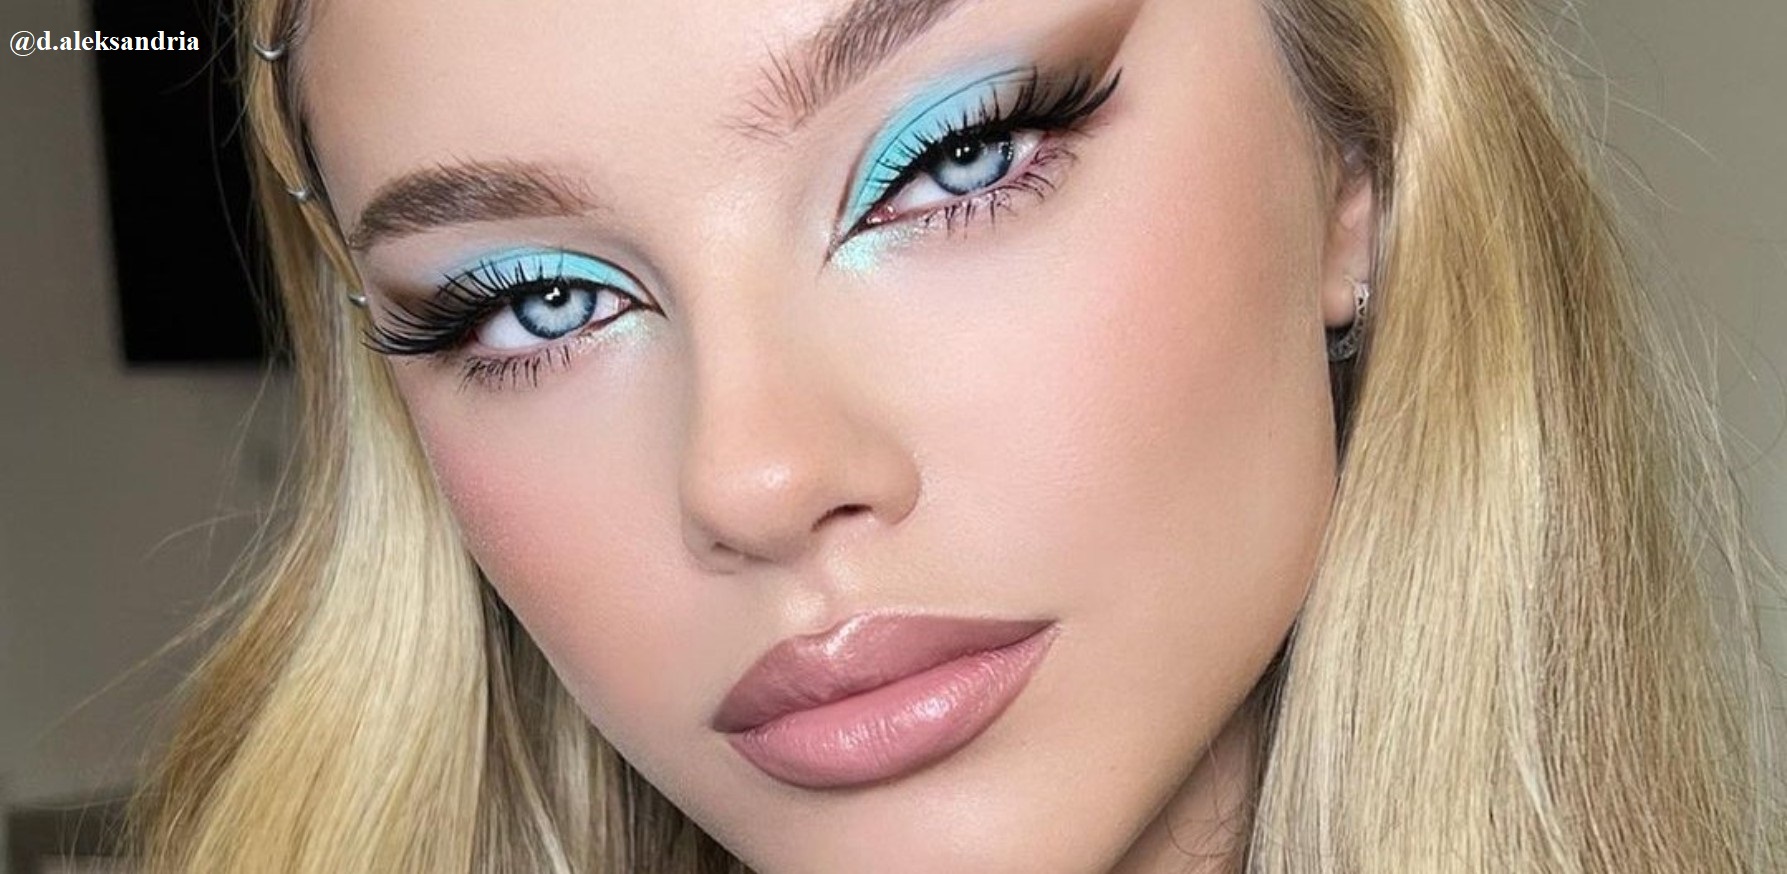 Make A Statement This December With These Swoon-Worthy Makeup Ideas (3)